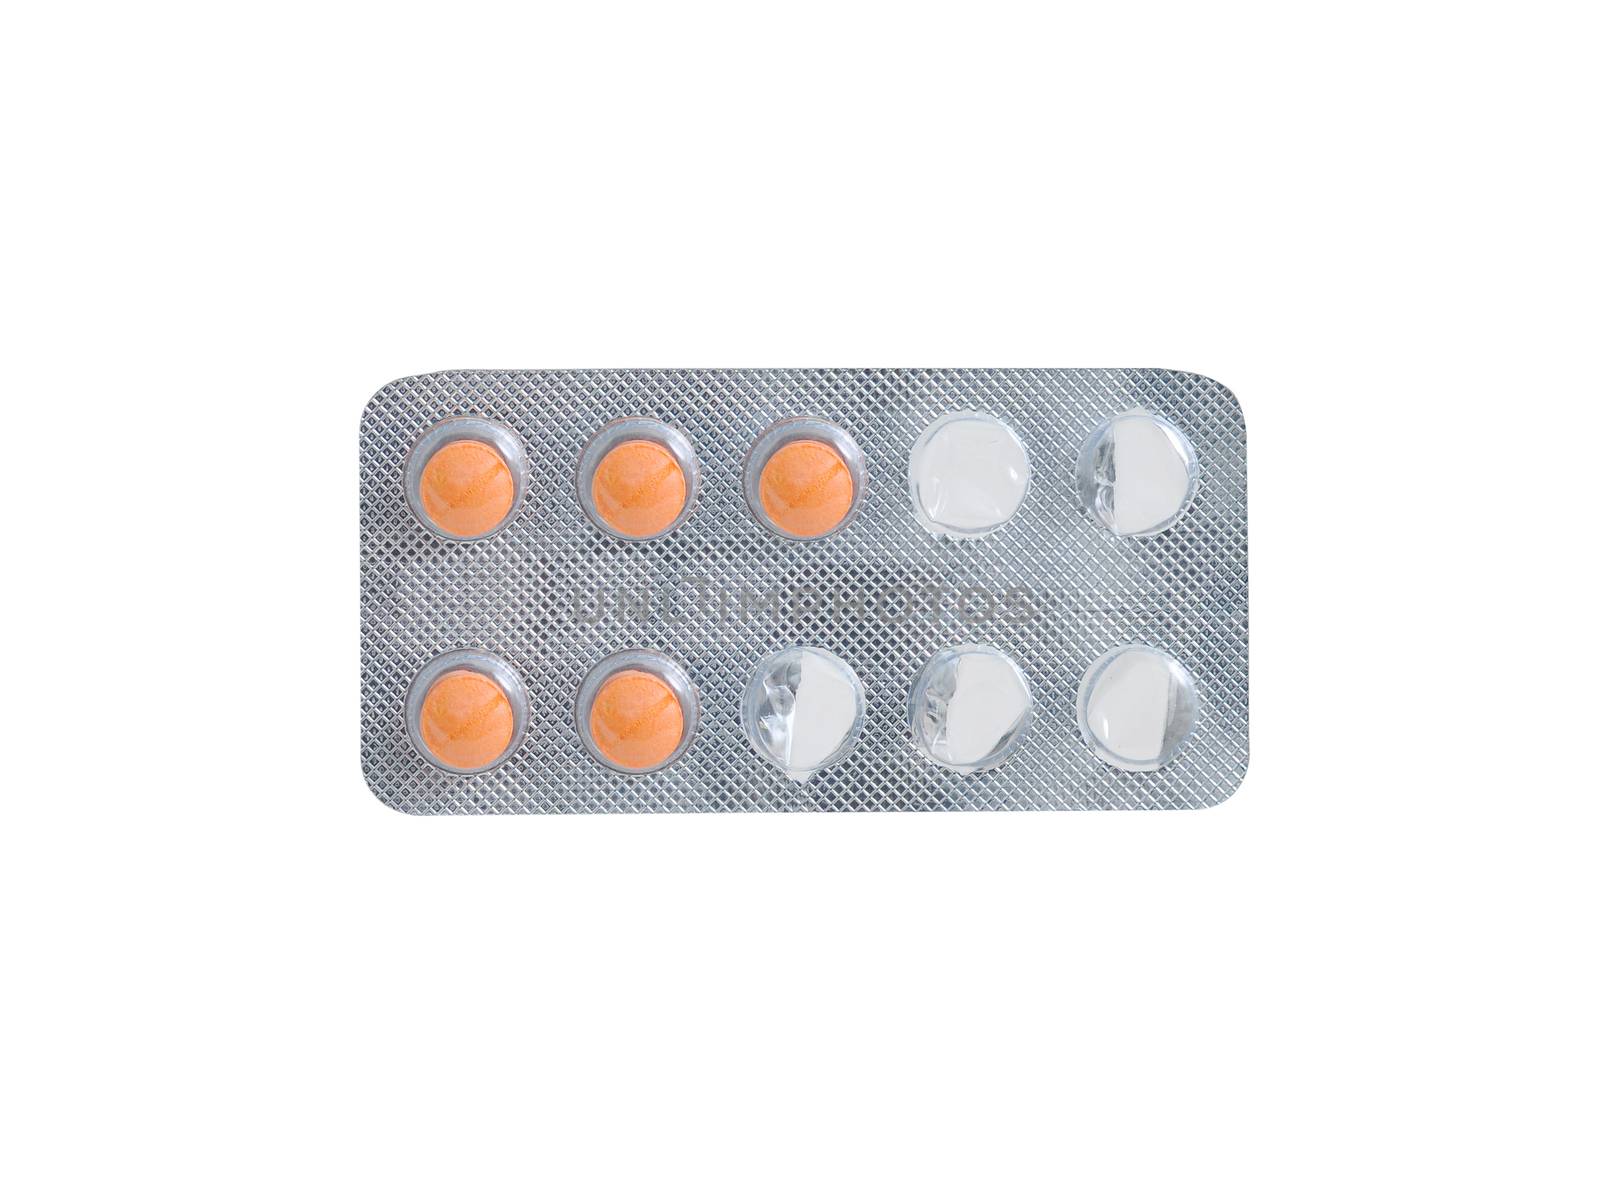 Used  packs of pills by NuwatPhoto